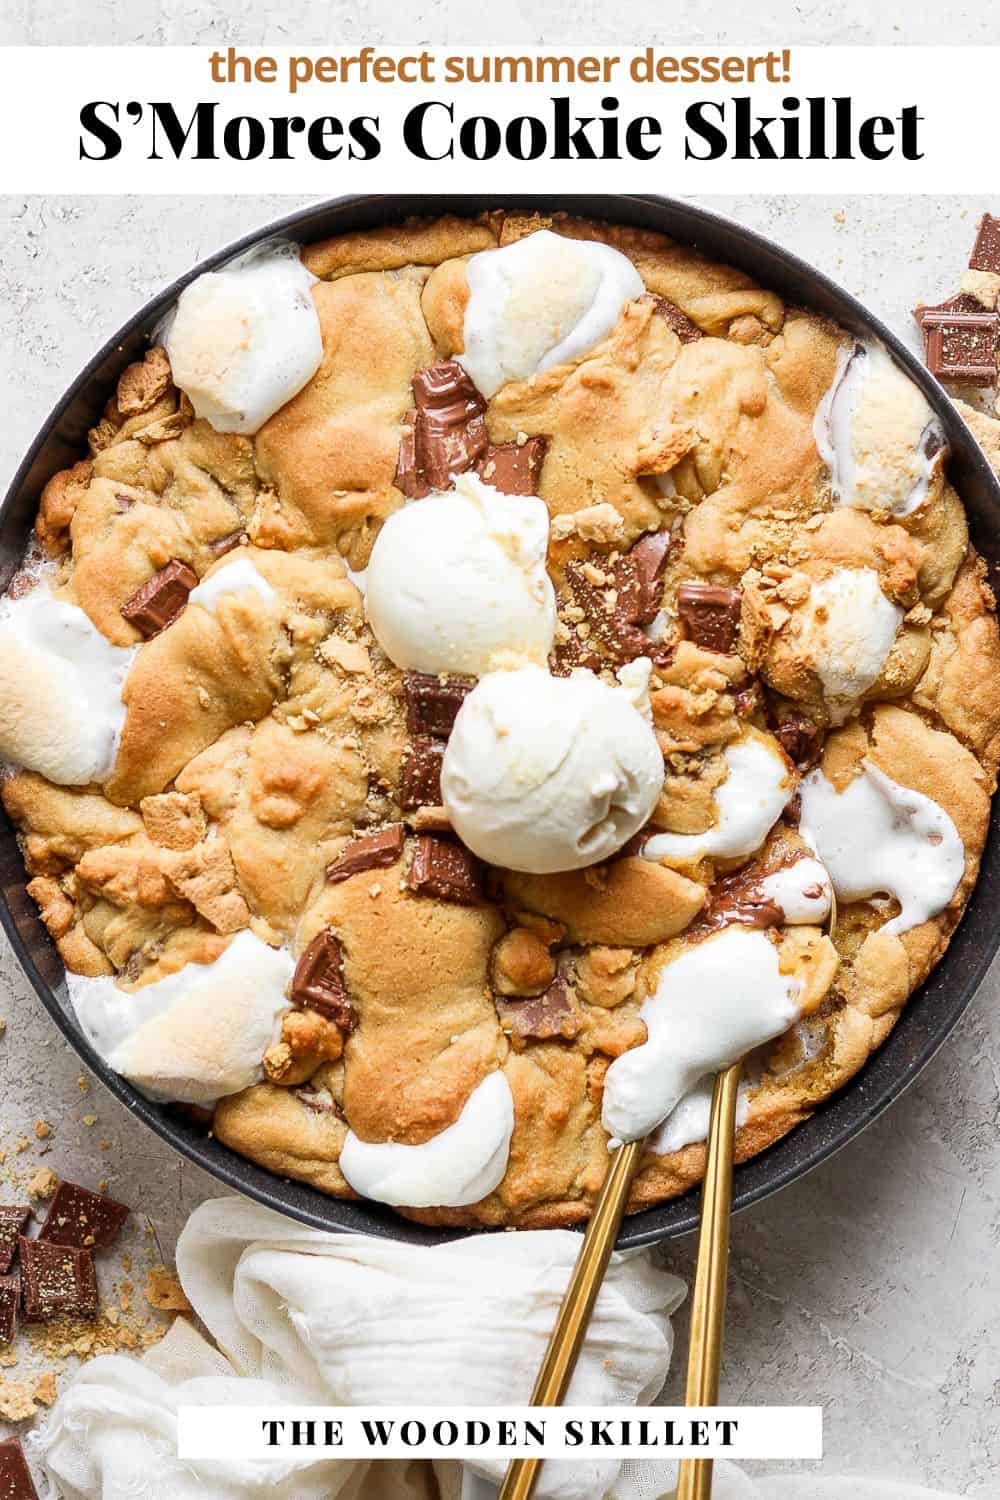 Pinterest image of a s'mores cookie skillet.